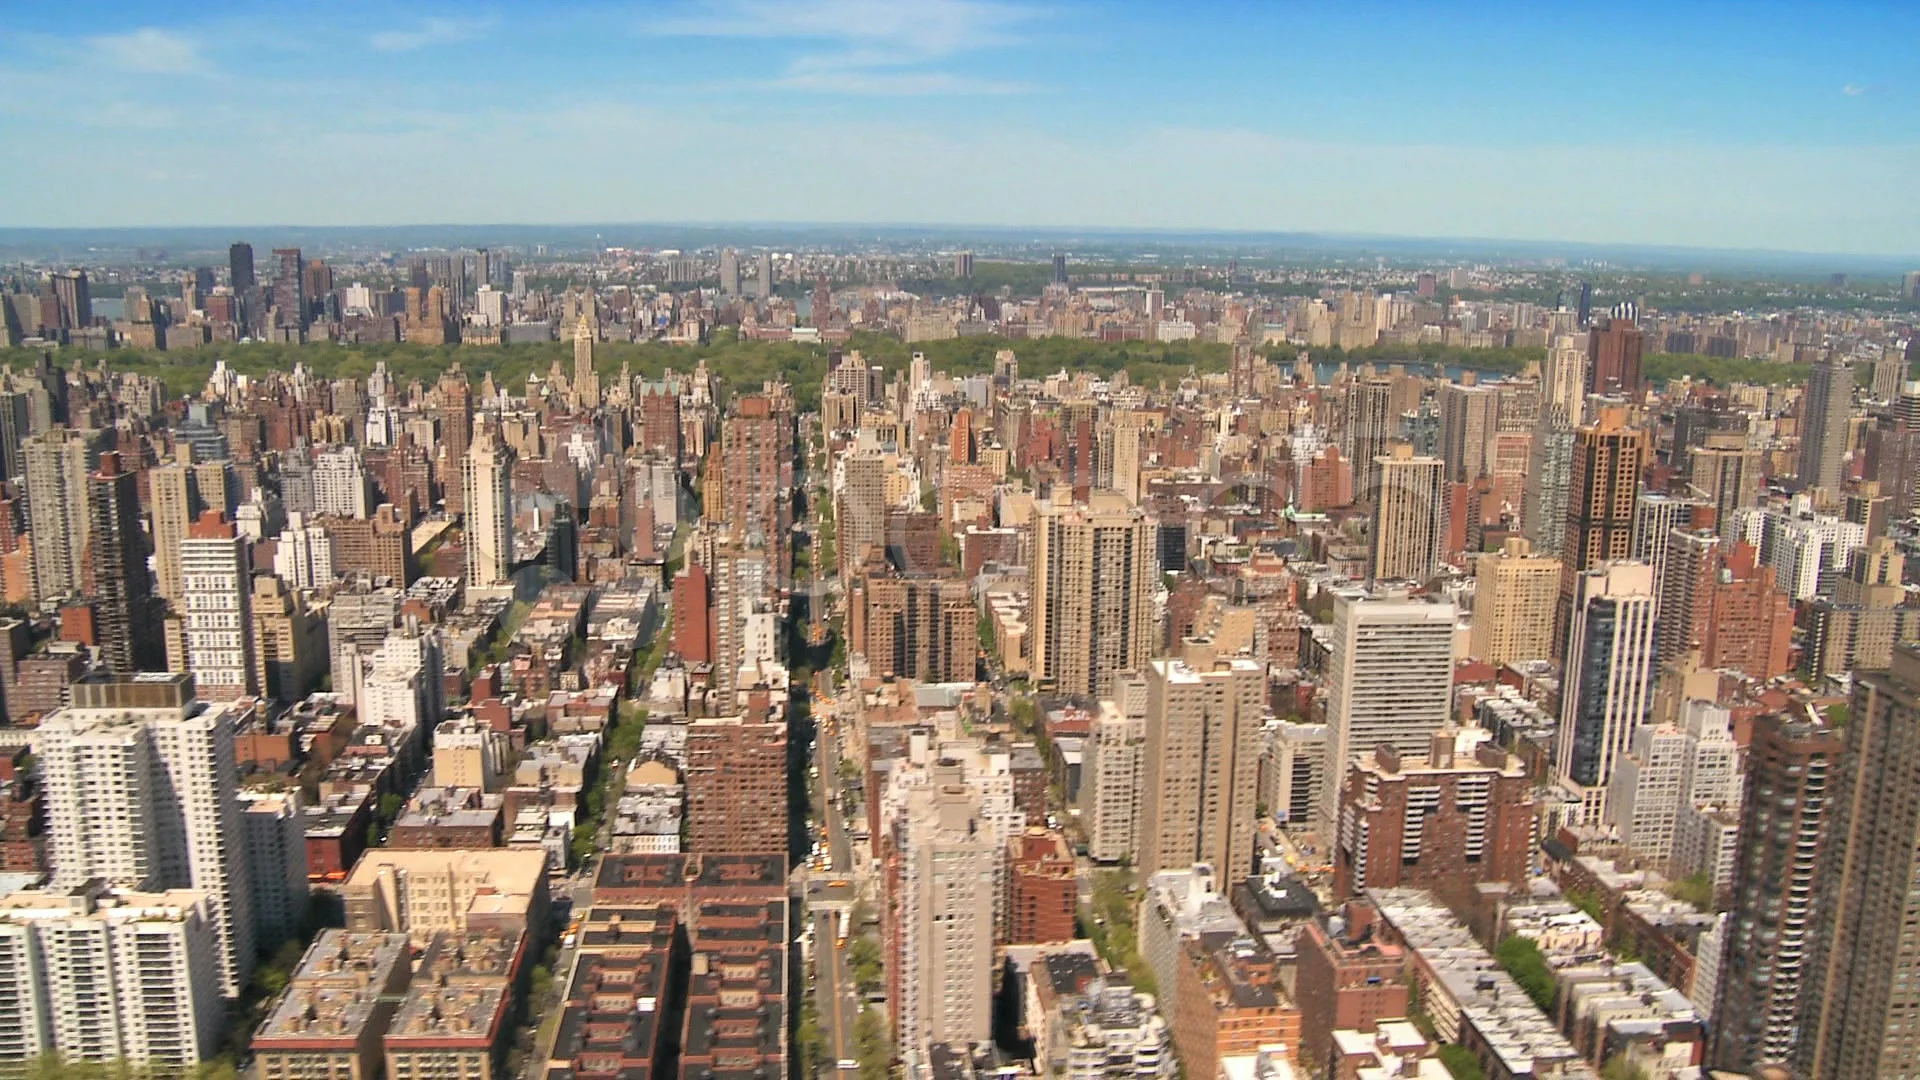 Aerial view of the Upper East Side and Central Park, Manhattan, NY, USA